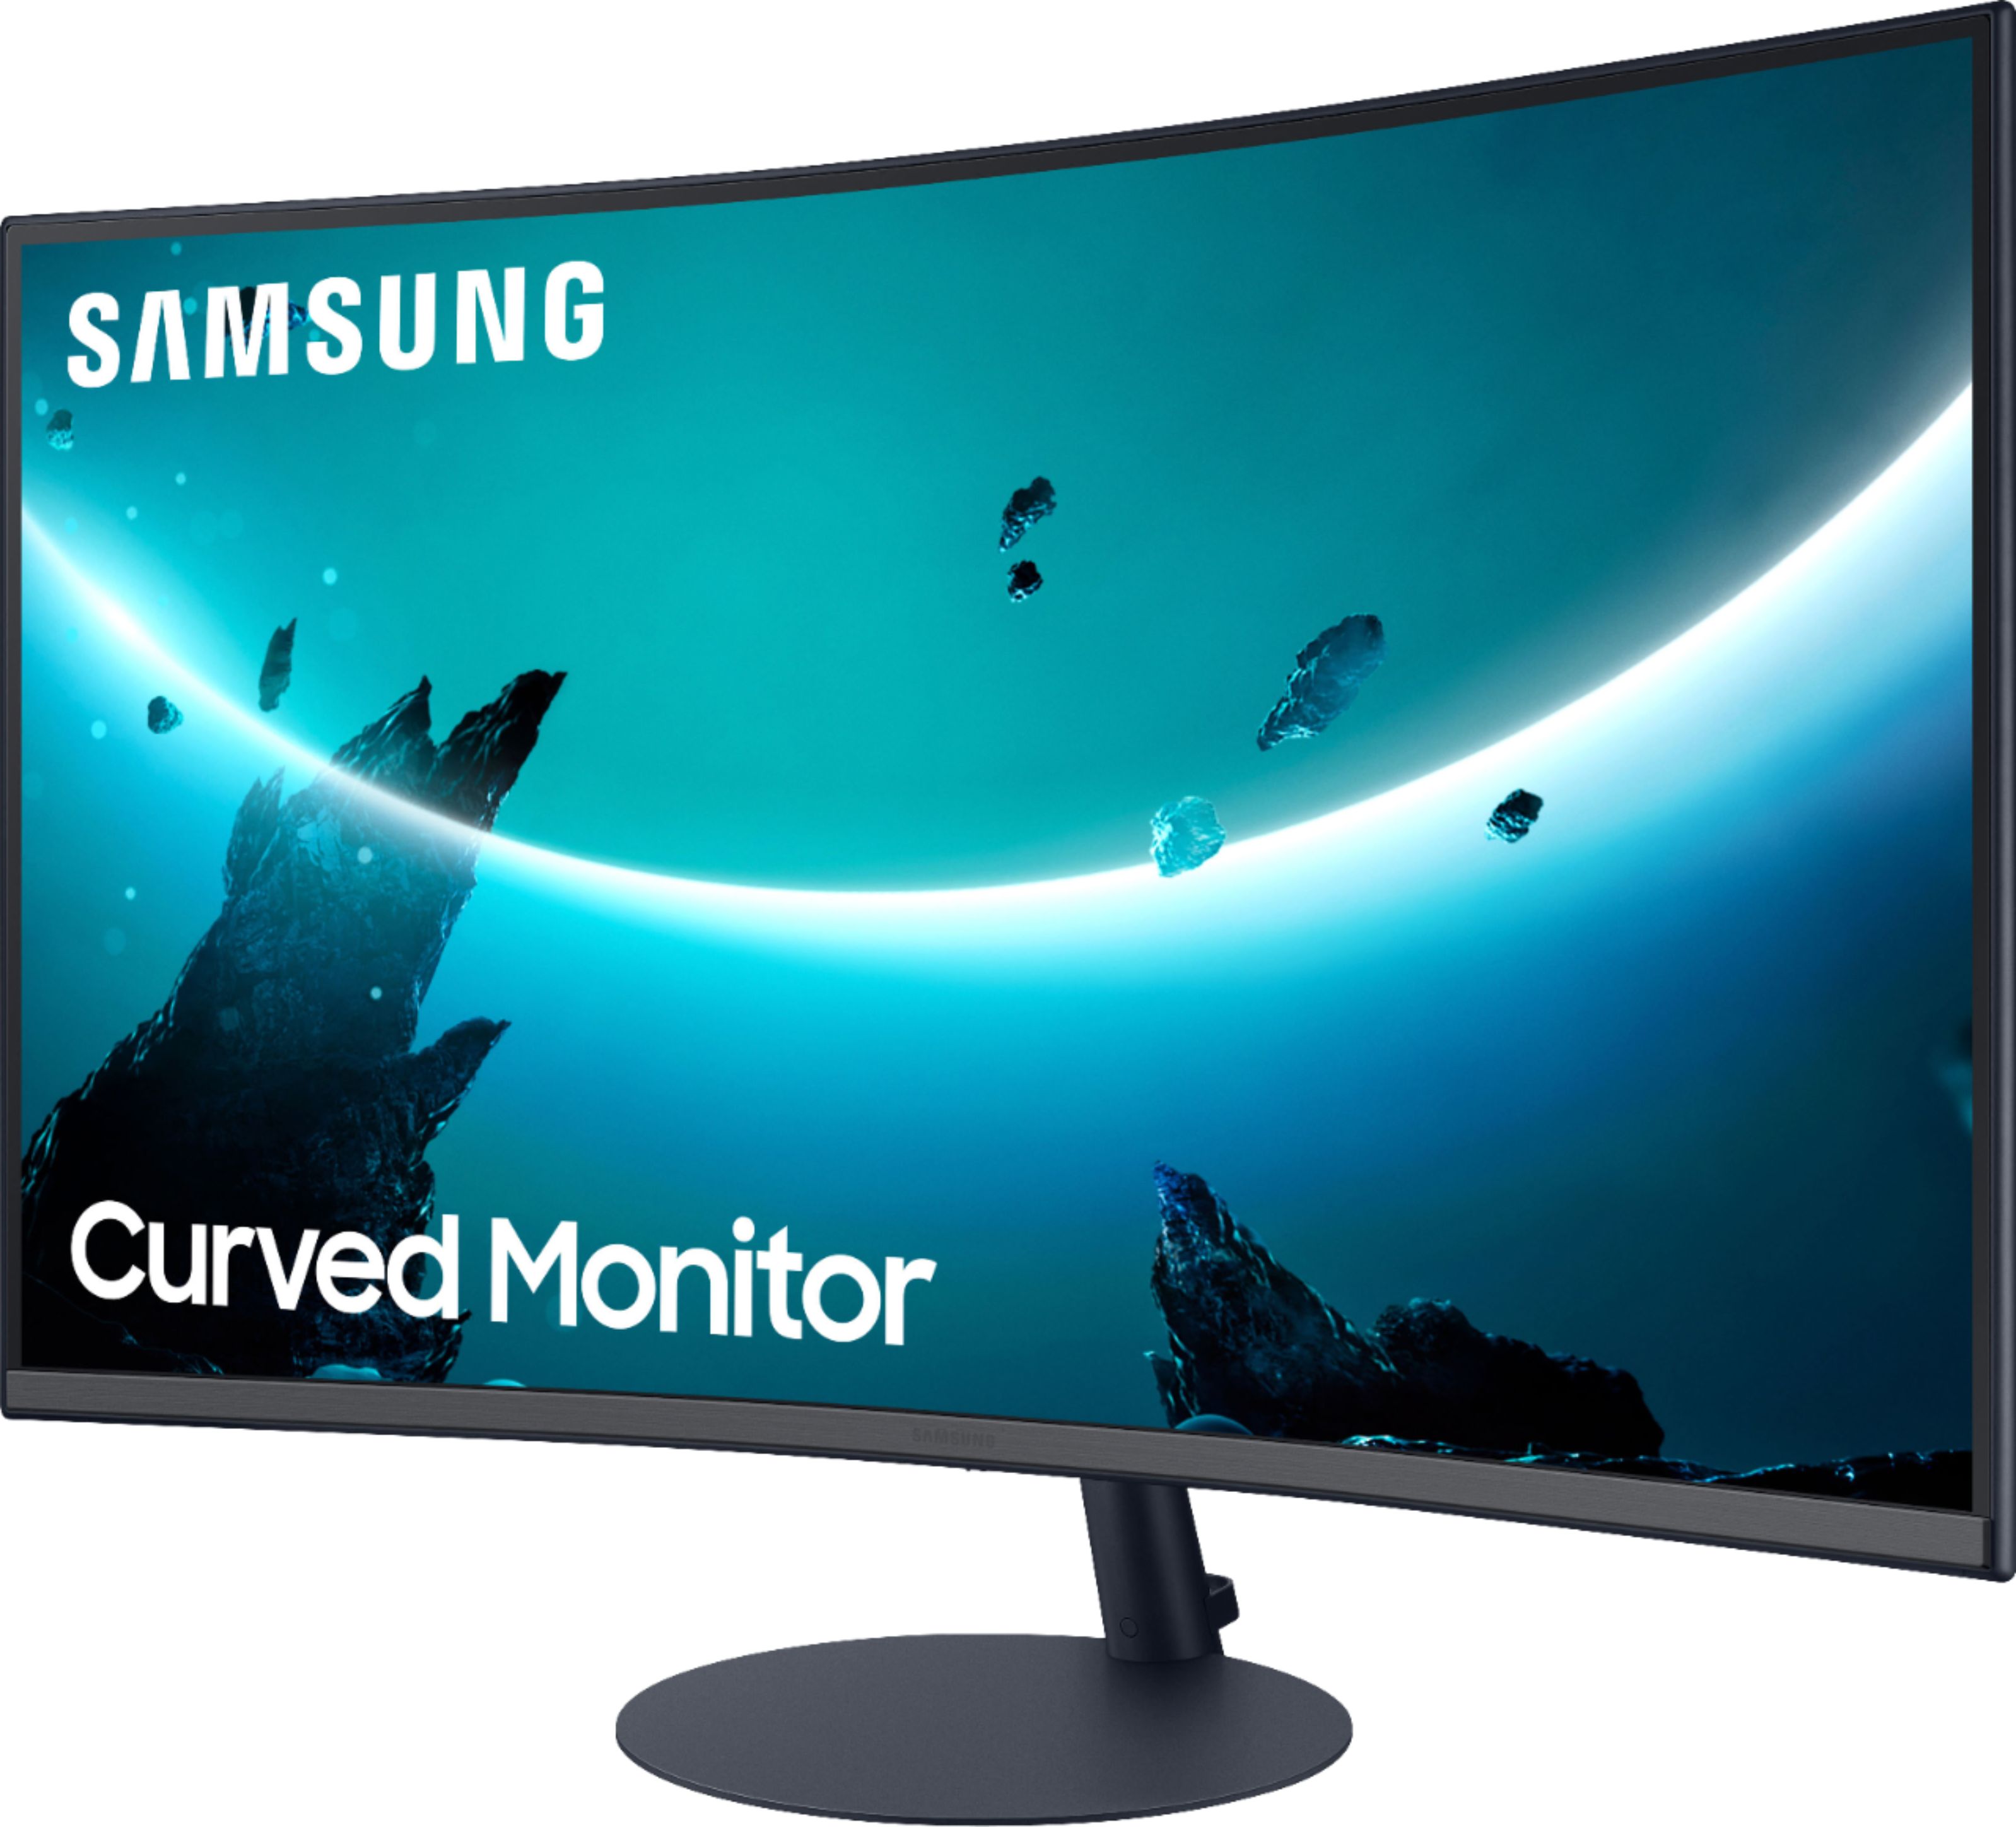 Left View: Samsung - Geek Squad Certified Refurbished T55 Series 27" LED Curved FHD Monitor - Dark Gray/Blue